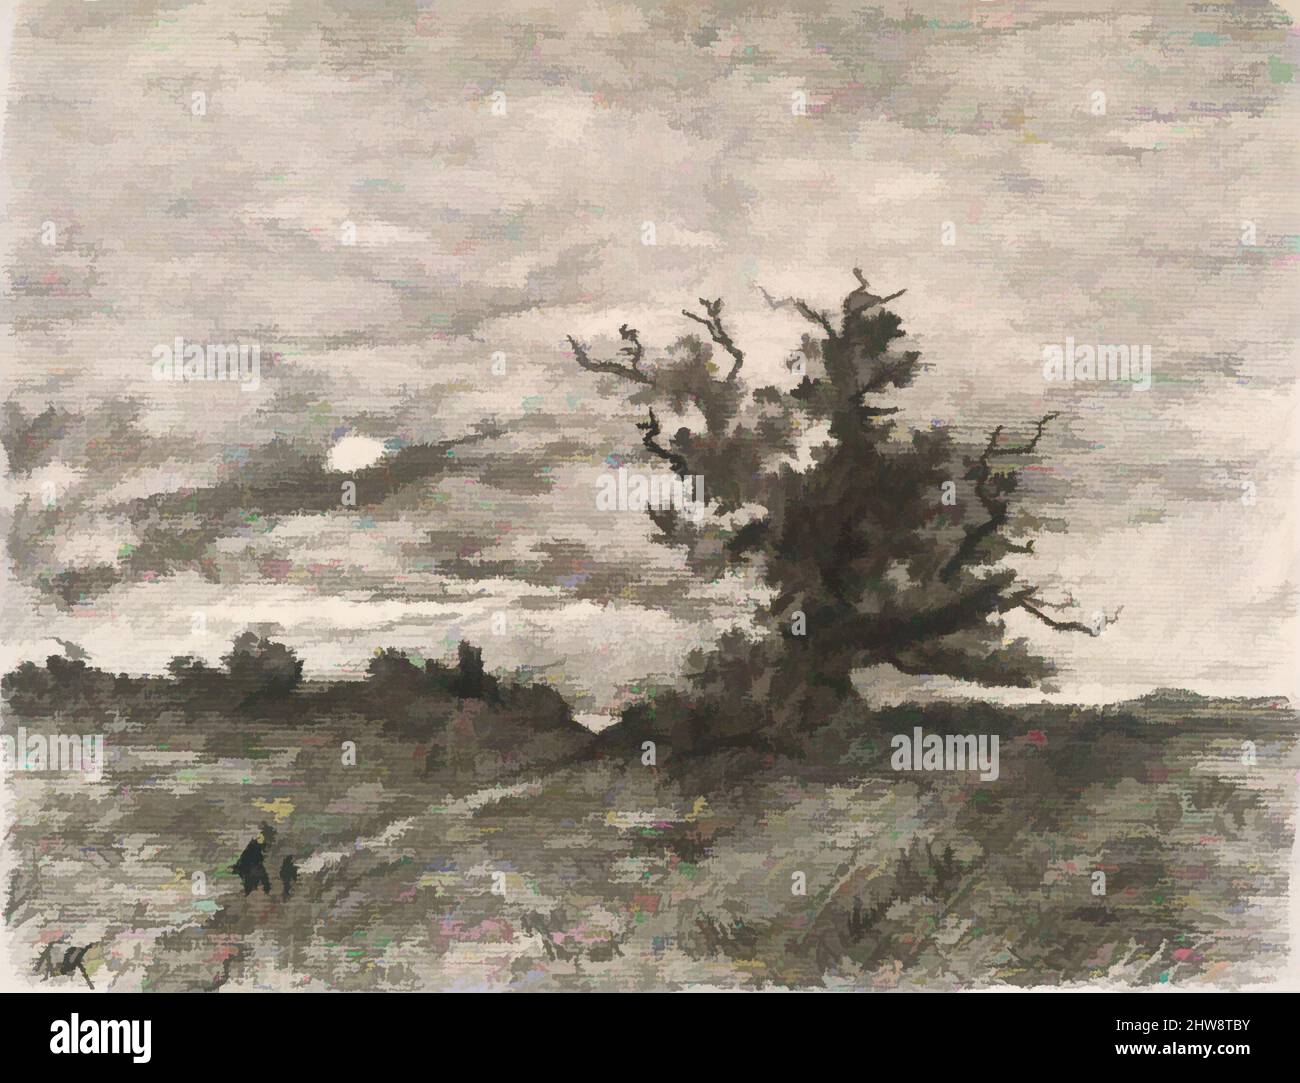 Art inspired by Moonlit Landscape, 1900–1910, Charcoal on off-white laid paper, 8 3/4 x 11 1/2 in. (22.3 x 29.2 cm), Drawings, Henri-Joseph Harpignies (French, Valenciennes 1819–1916 Saint-Privé, Classic works modernized by Artotop with a splash of modernity. Shapes, color and value, eye-catching visual impact on art. Emotions through freedom of artworks in a contemporary way. A timeless message pursuing a wildly creative new direction. Artists turning to the digital medium and creating the Artotop NFT Stock Photo